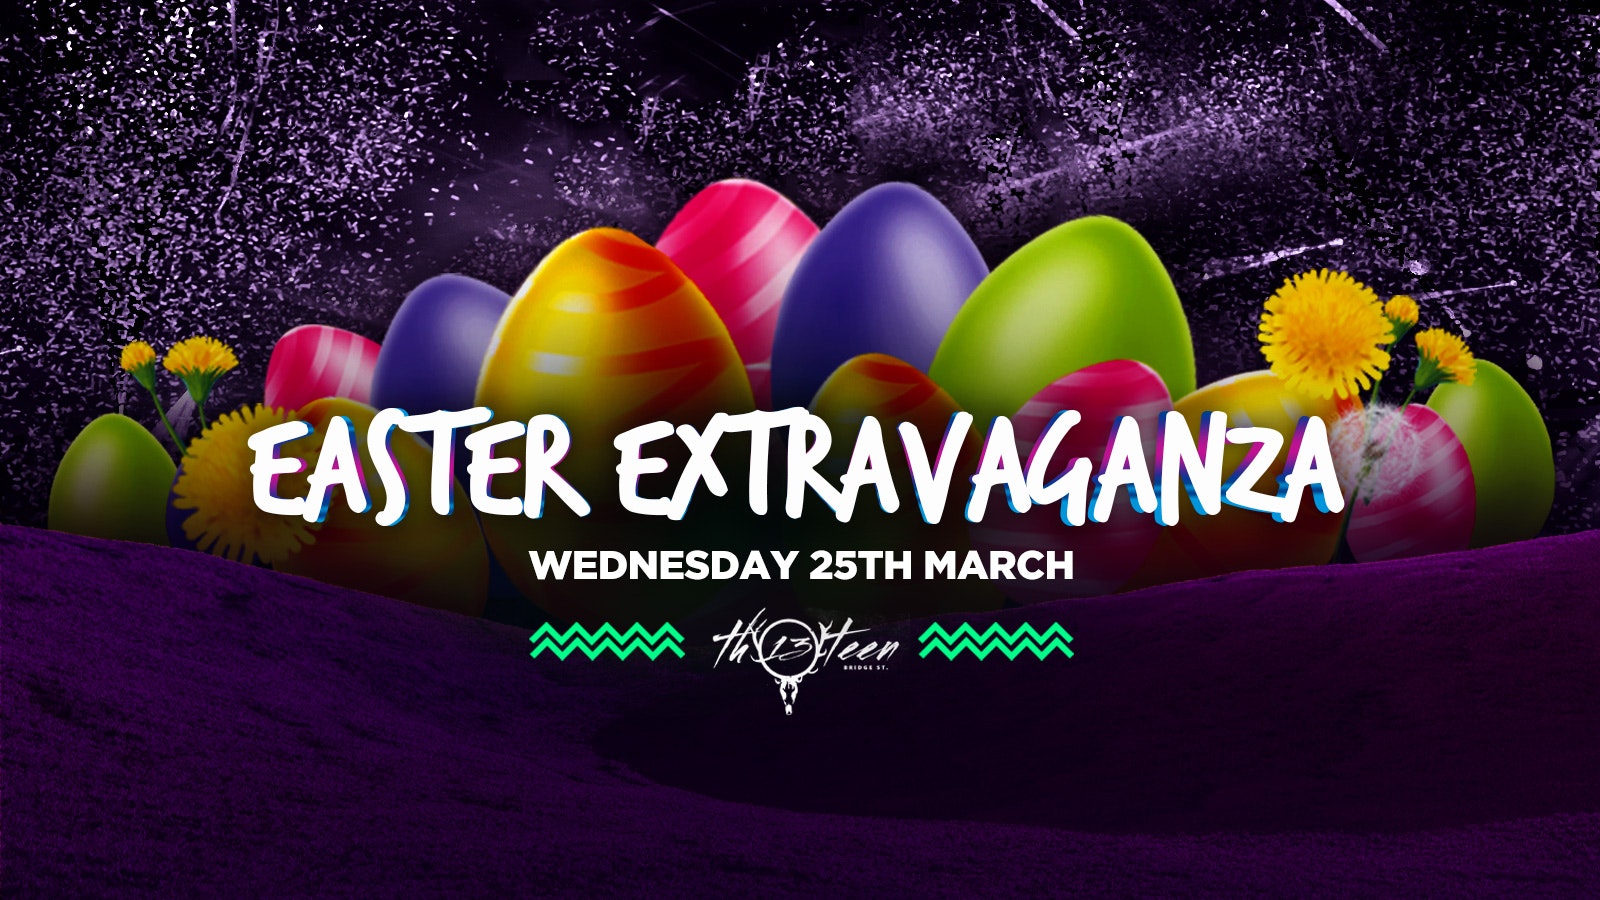 The Easter Extravaganza – End of Term Party – First 100 Tickets £1!